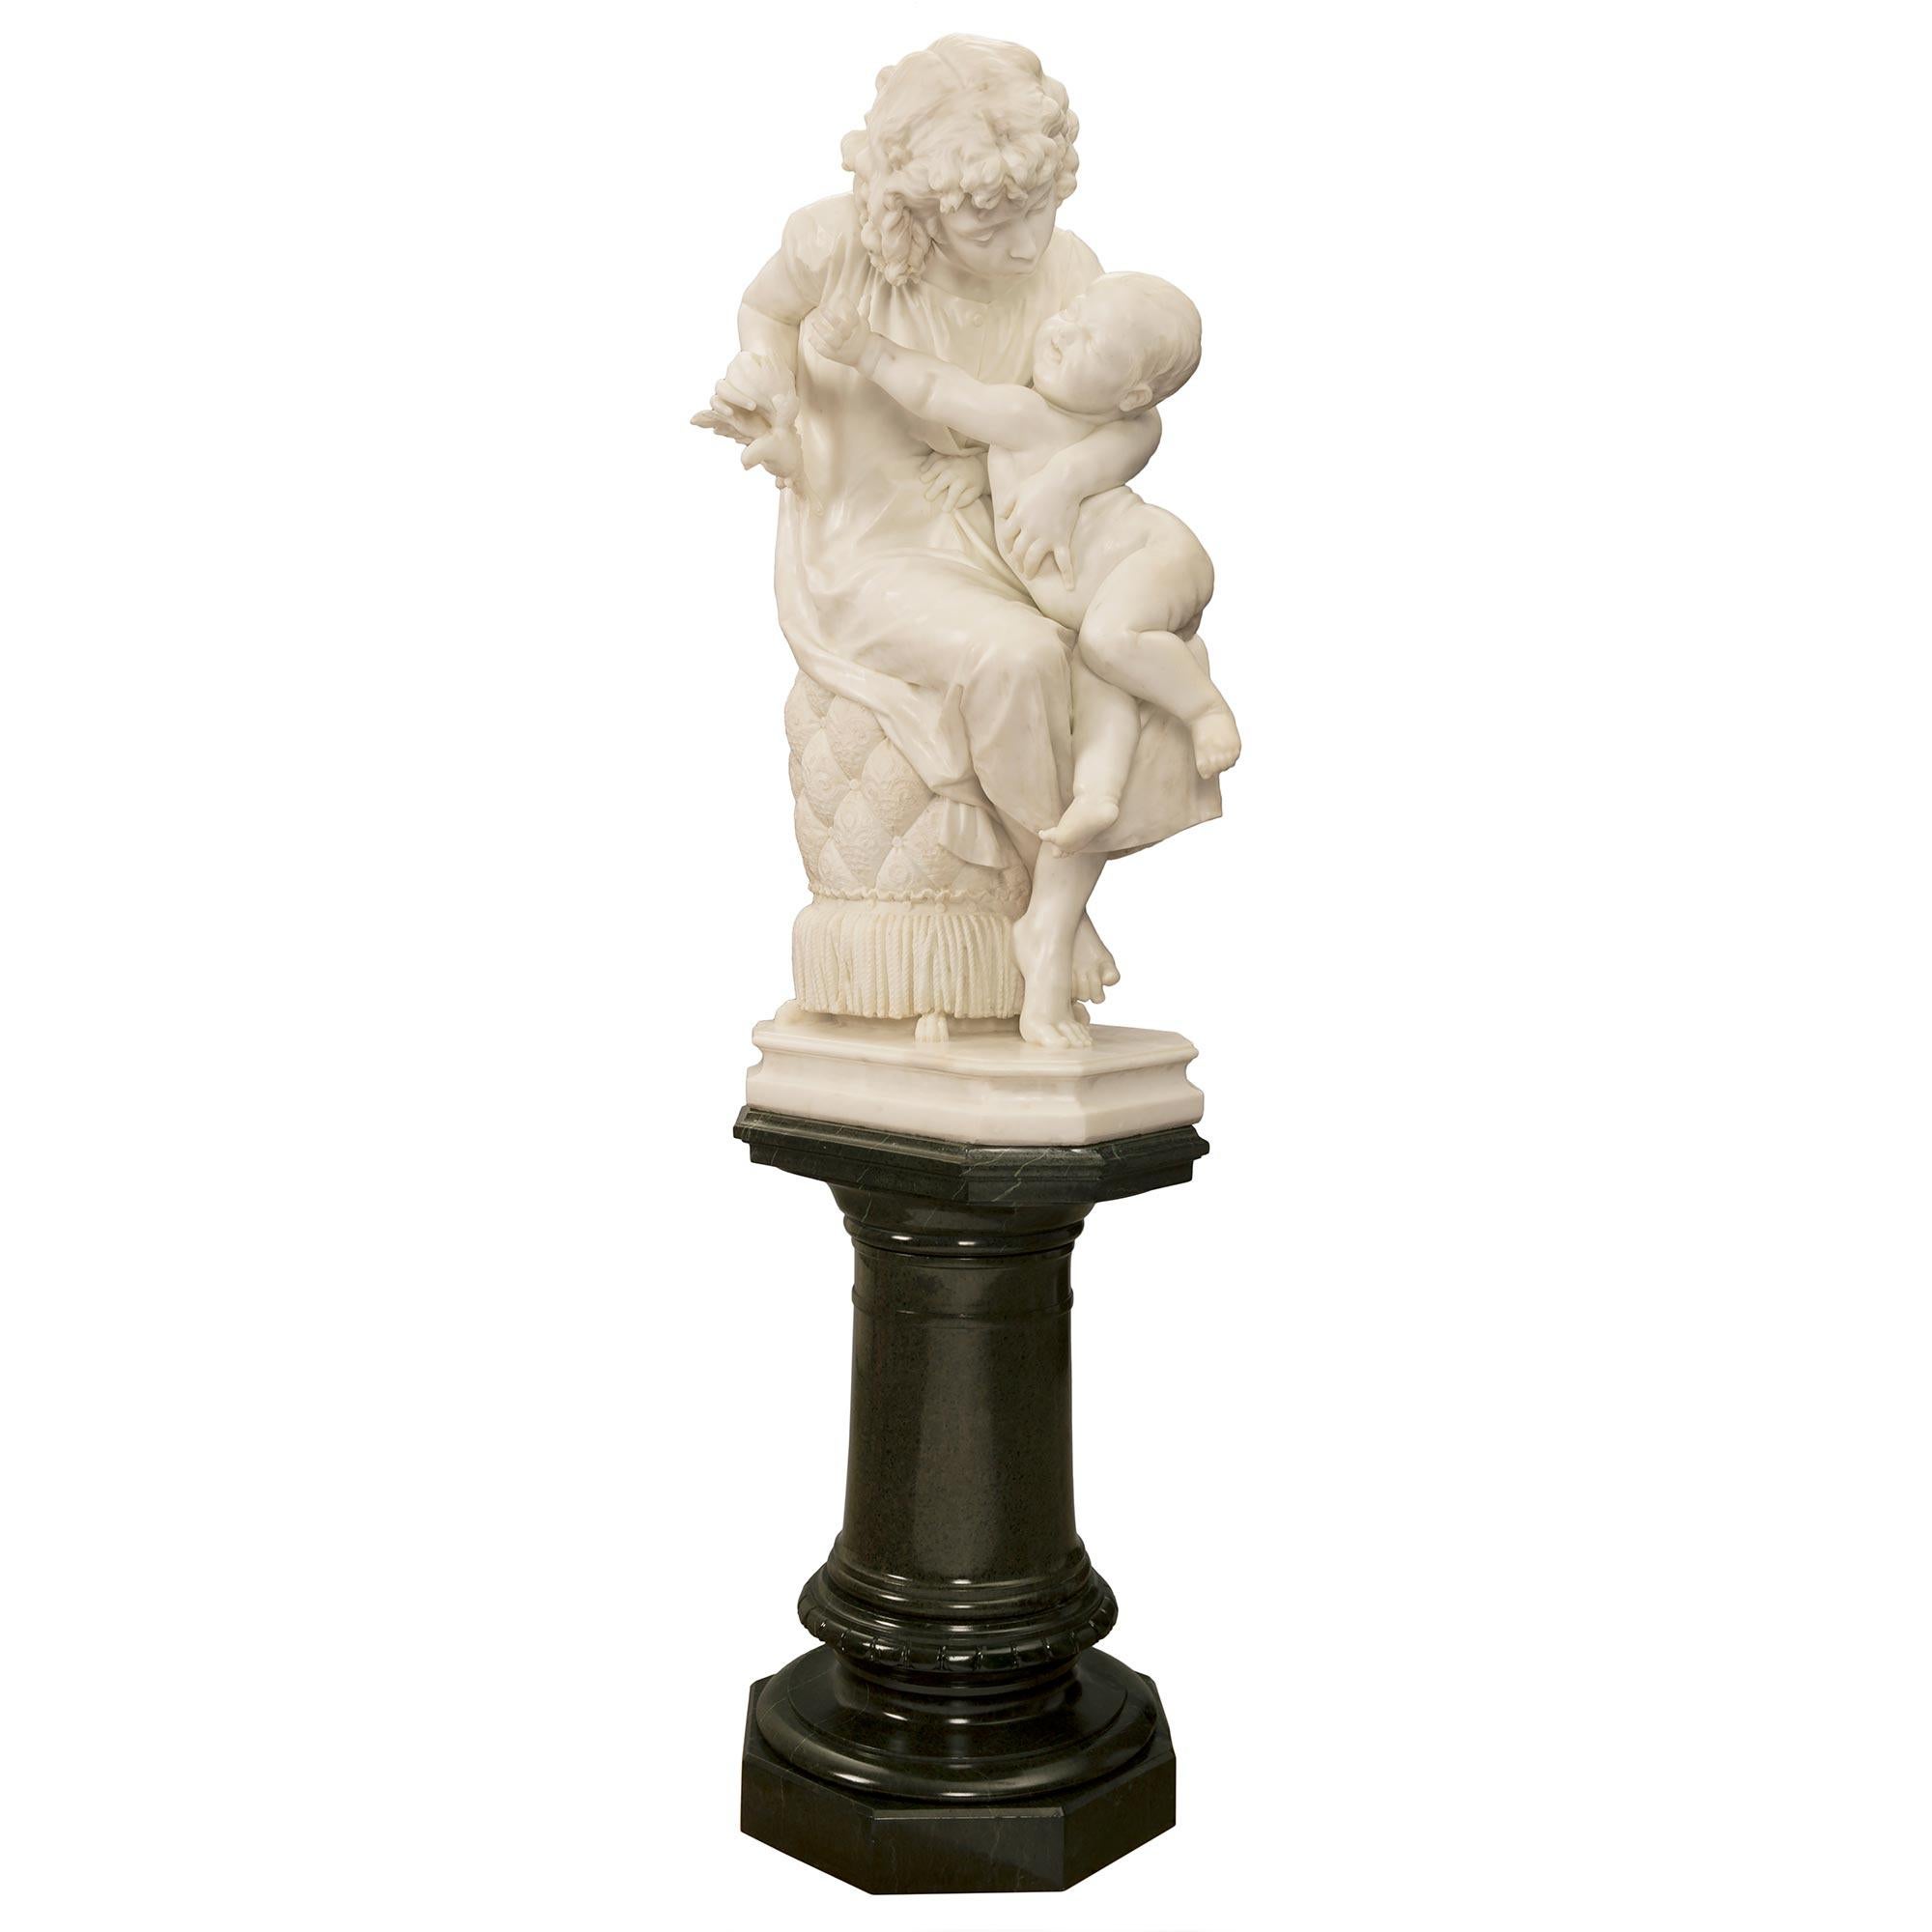 Italian 19th Century White Carrara Marble Statue on Its Original Swivel Pedestal In Good Condition For Sale In West Palm Beach, FL